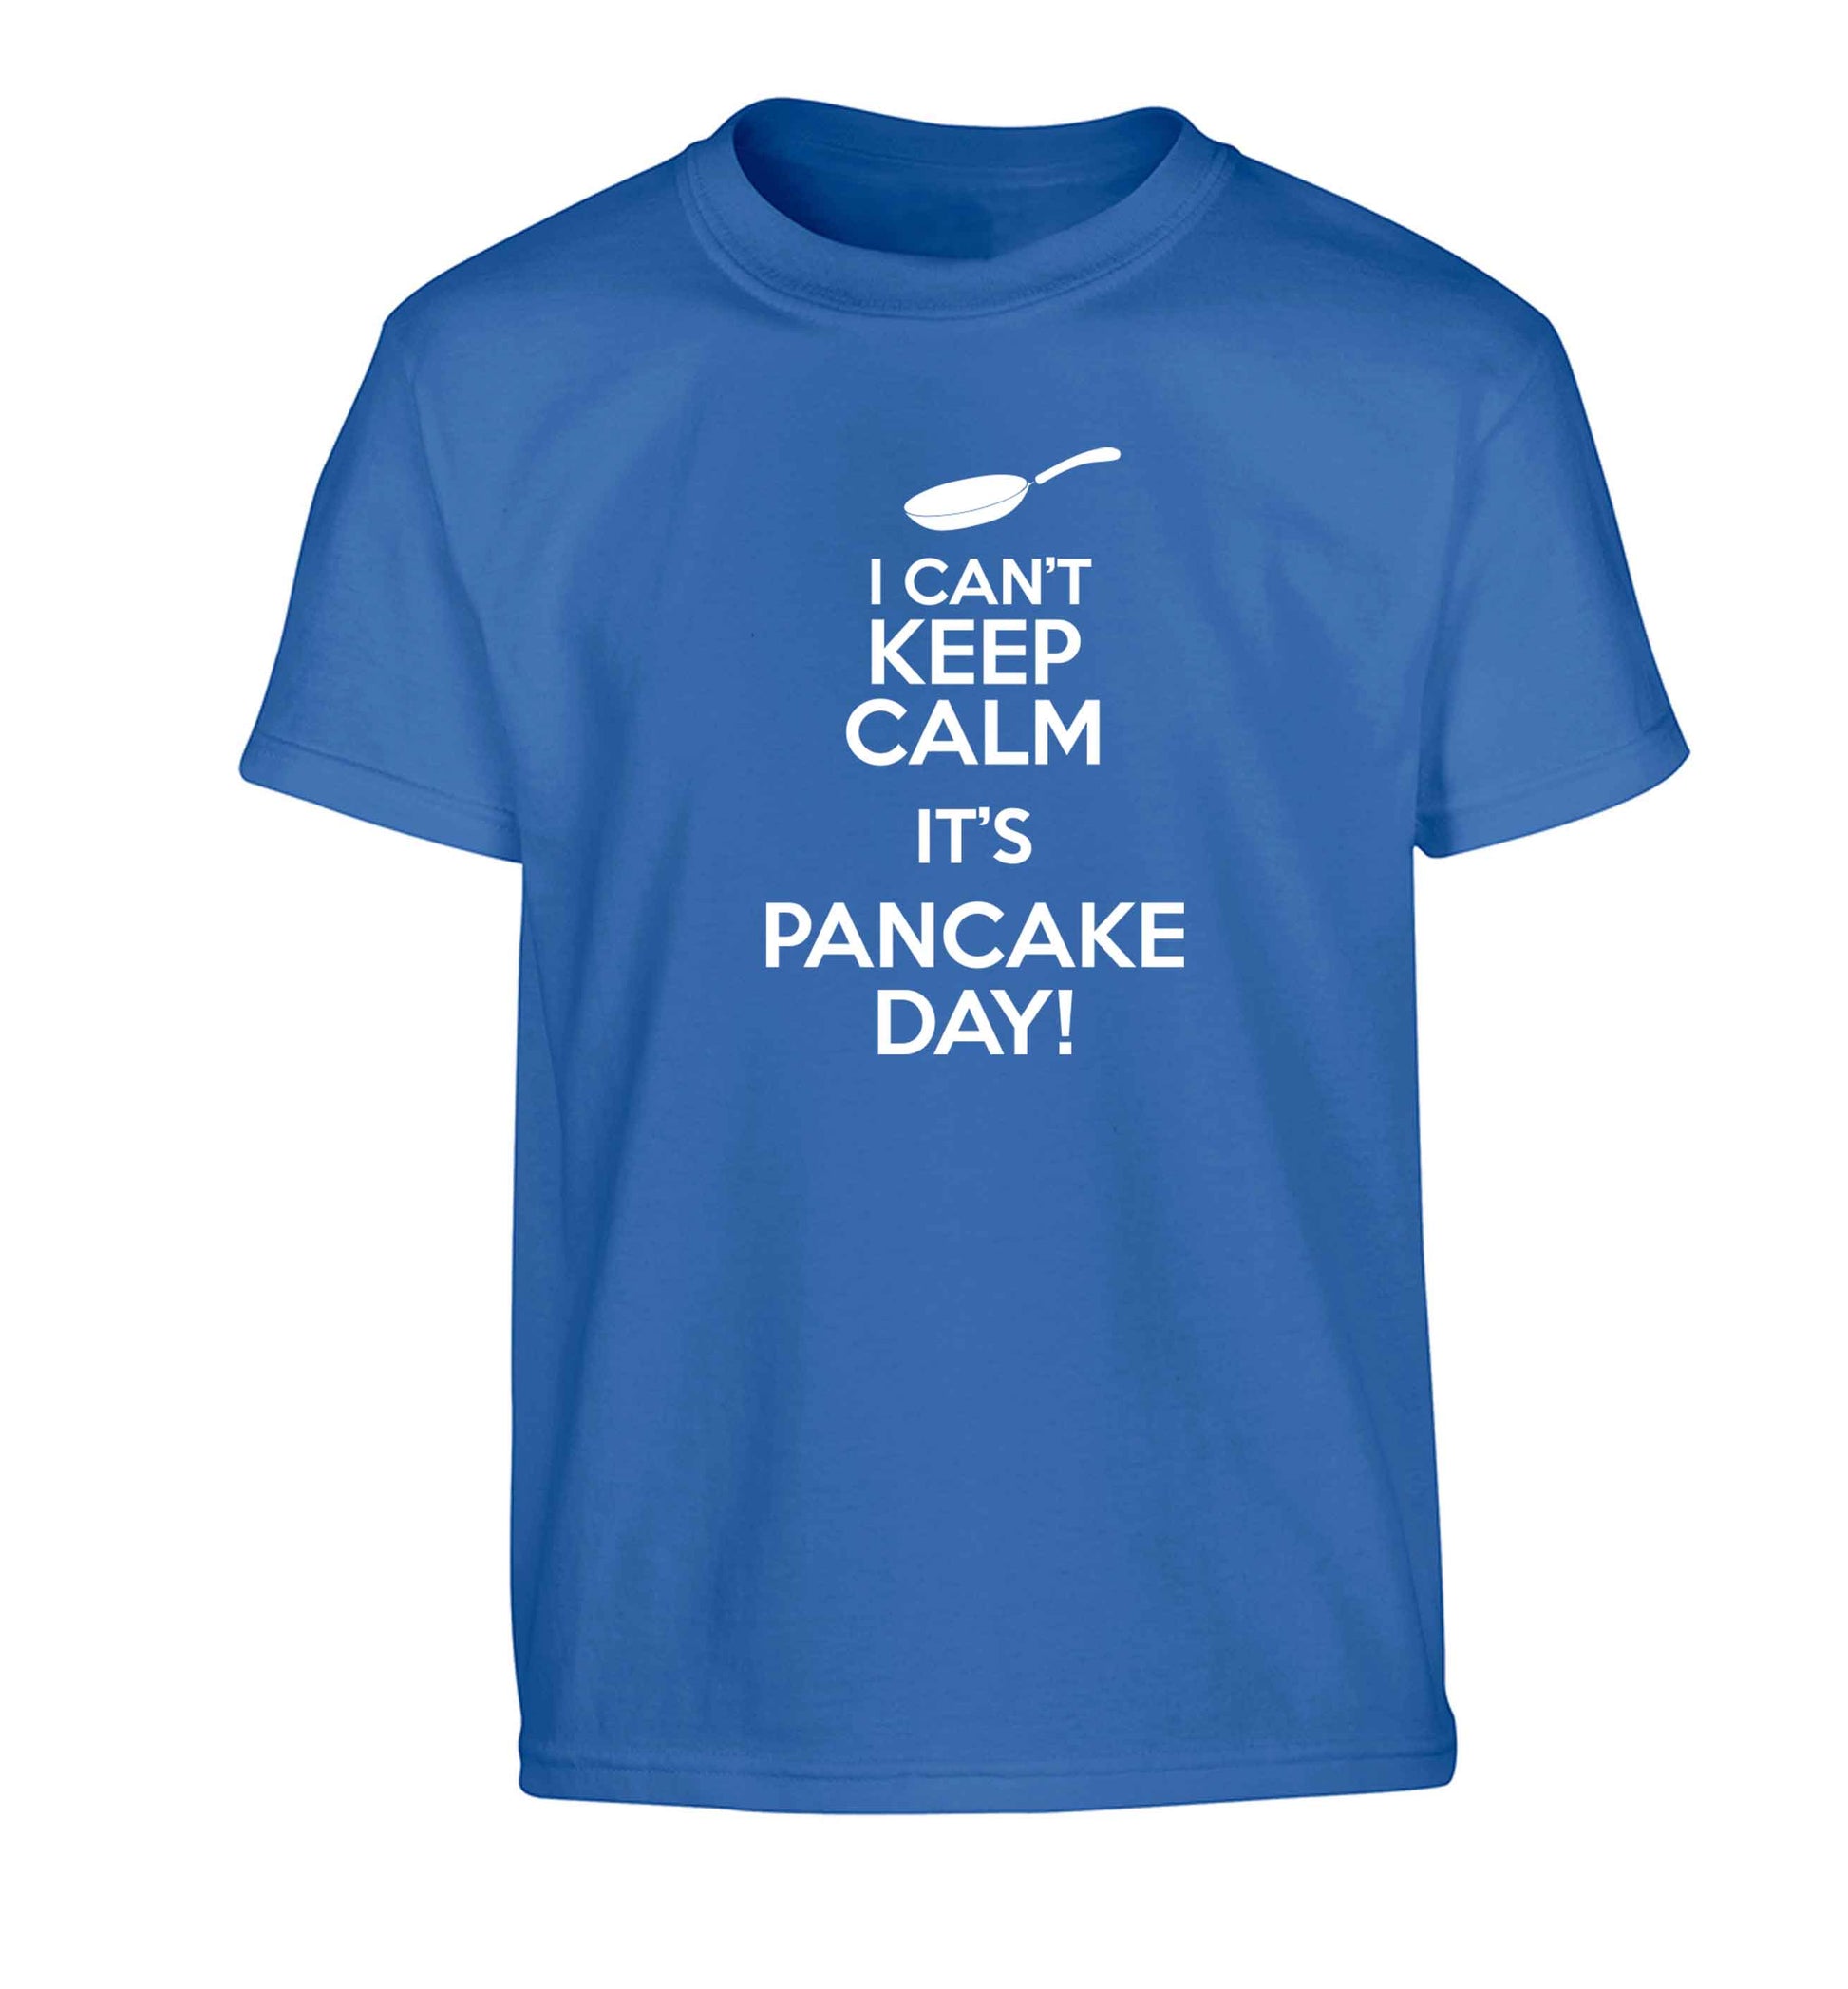 I can't keep calm it's pancake day! Children's blue Tshirt 12-13 Years